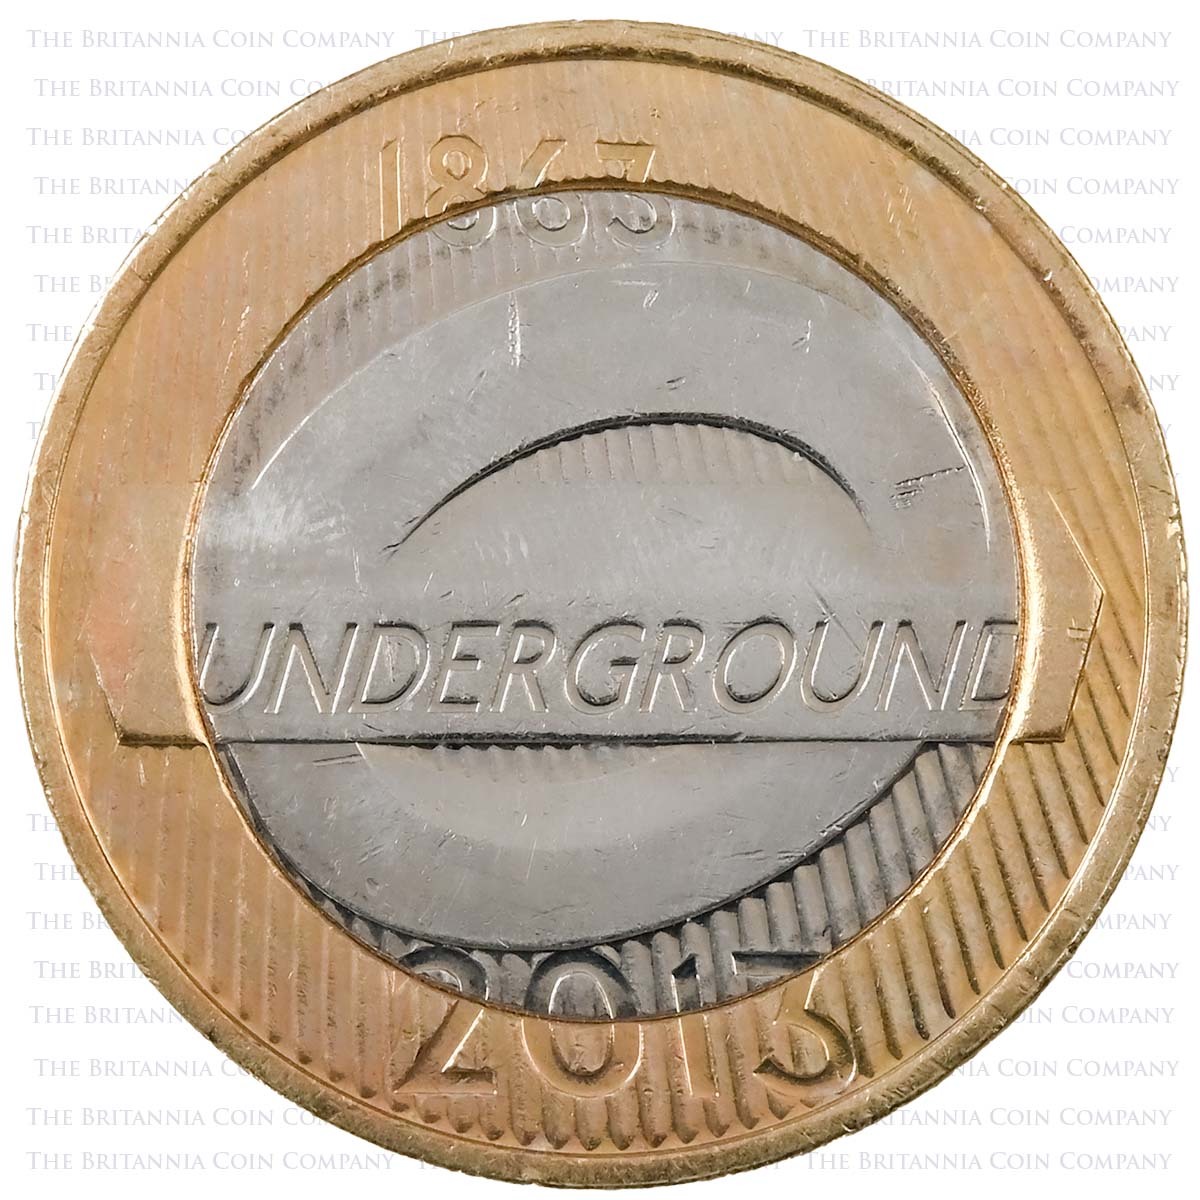 2013 London Underground Tube Roundel Logo Circulated Two Pound Coin Reverse